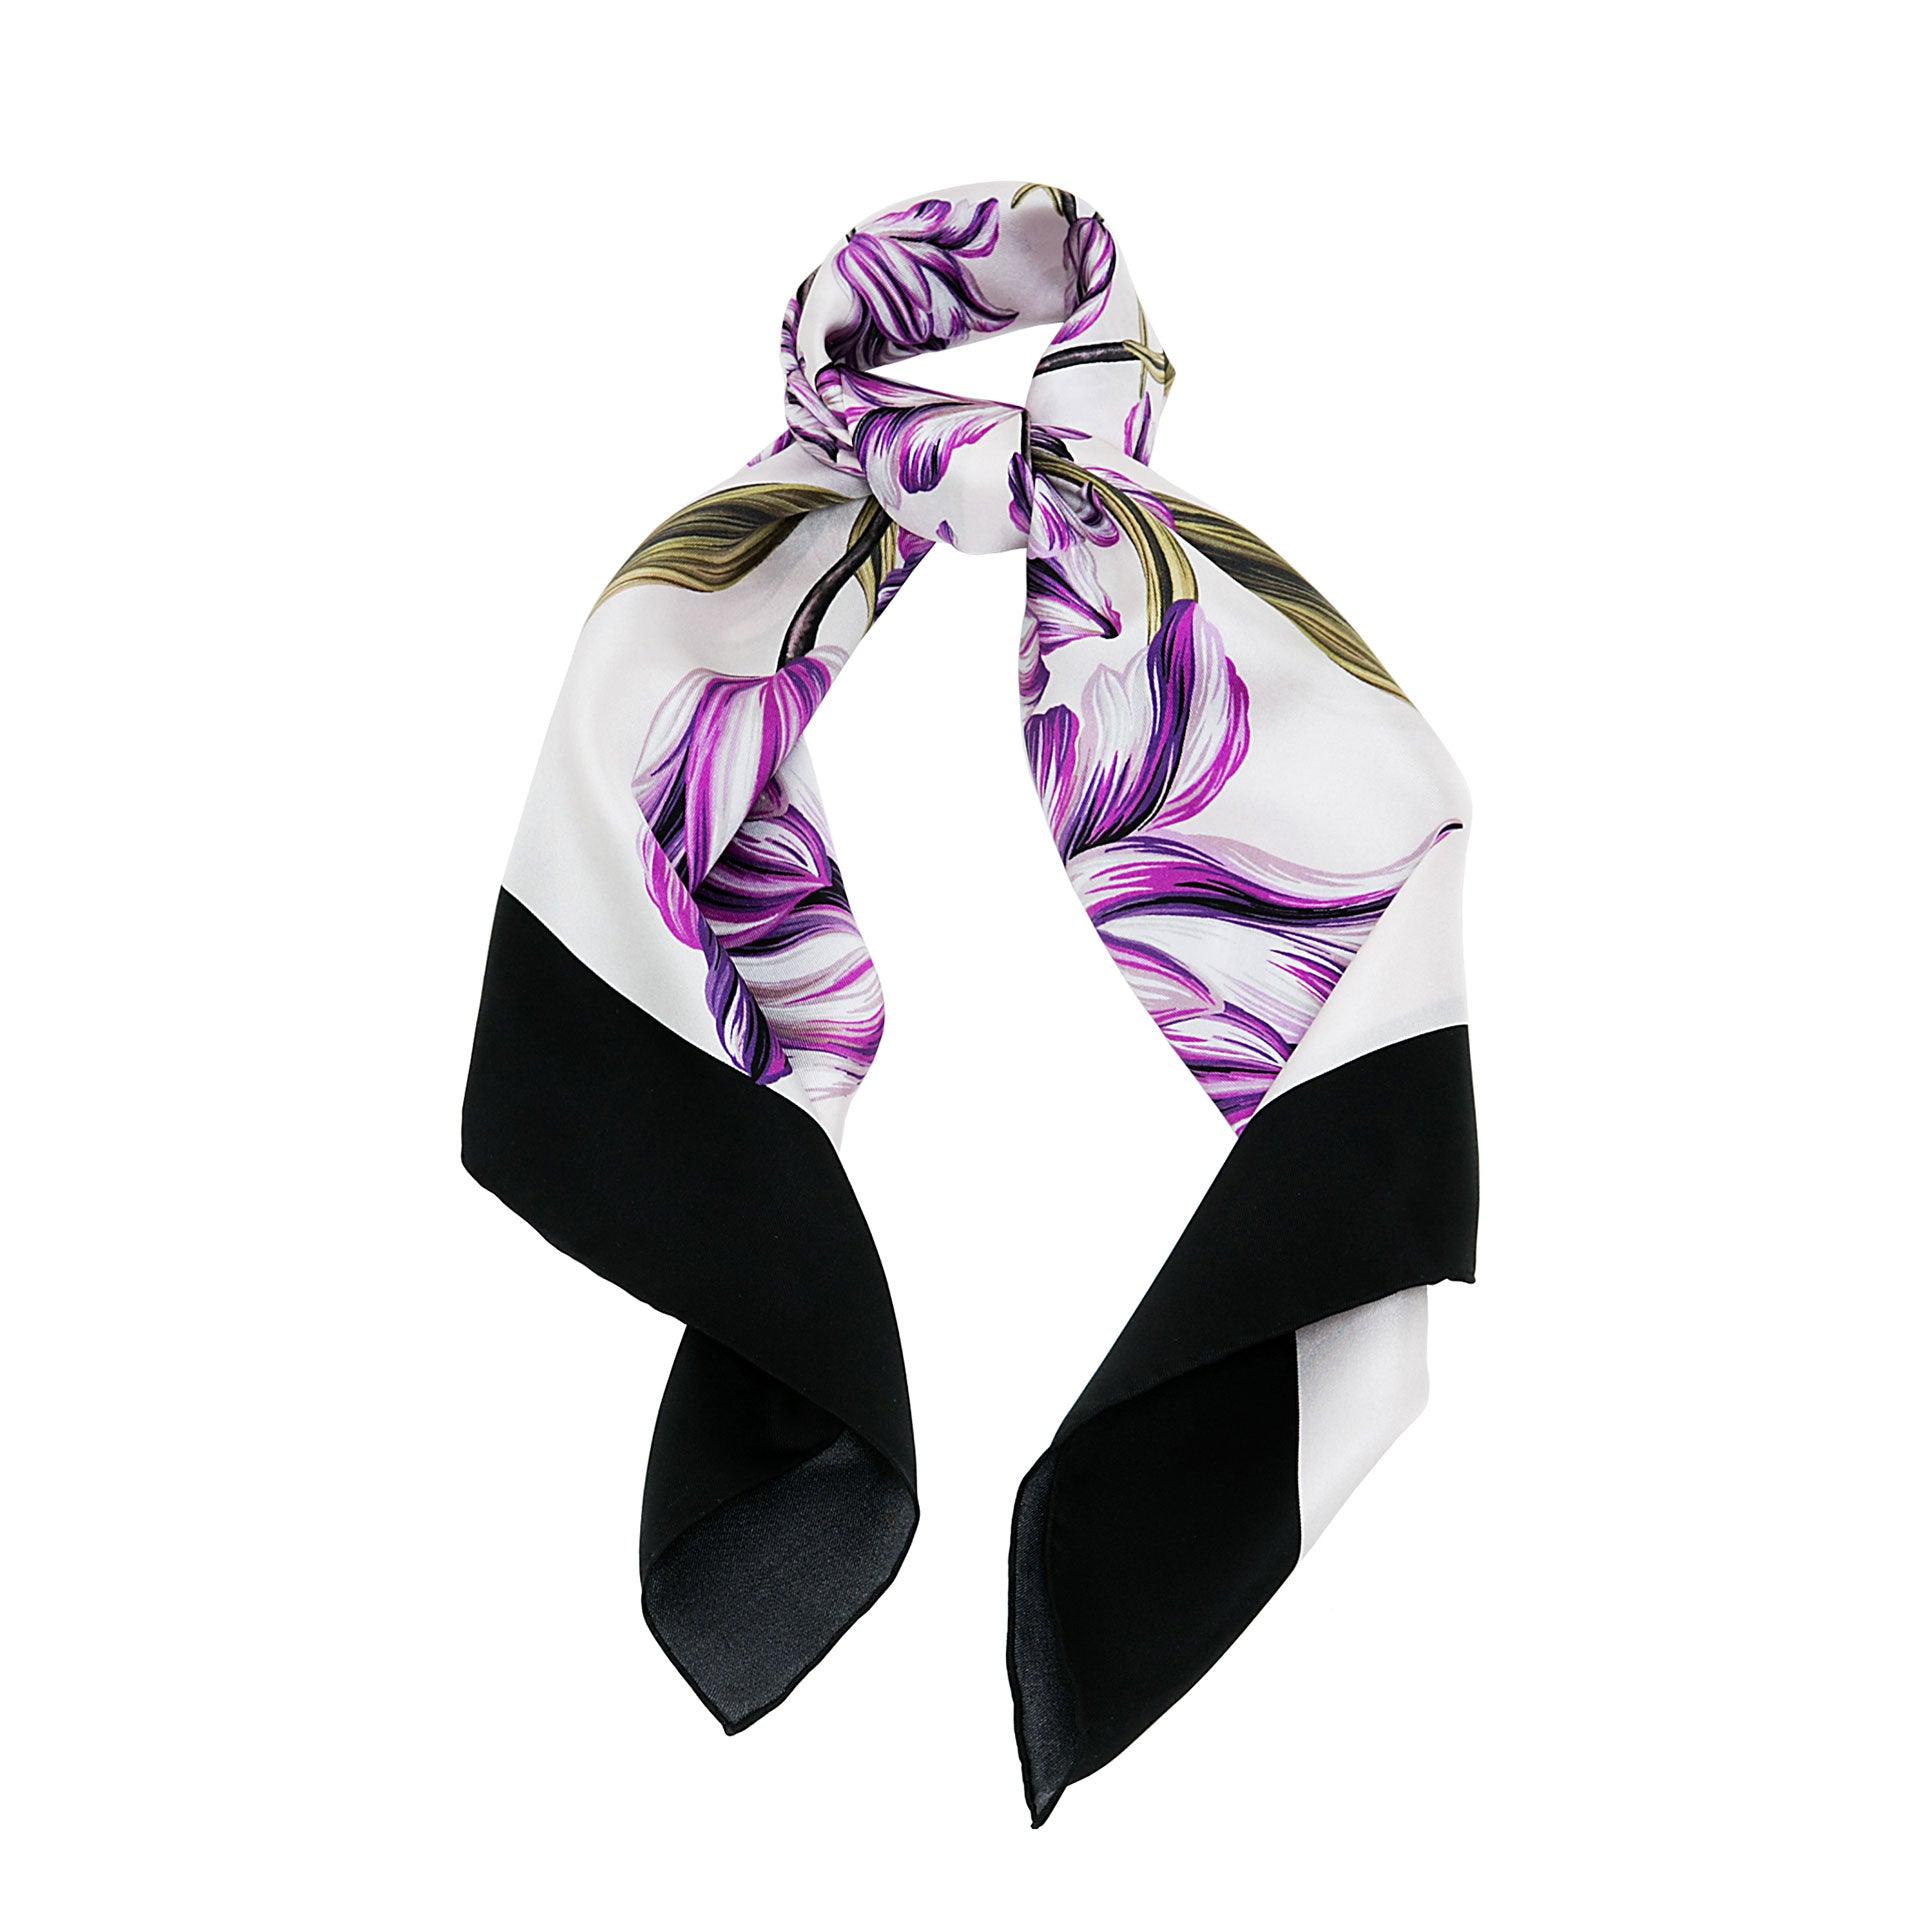 Violet British Tulip Garden Silk Scarf - Fusion of London's design and Italian craftsmanship, an exquisite gift choice.